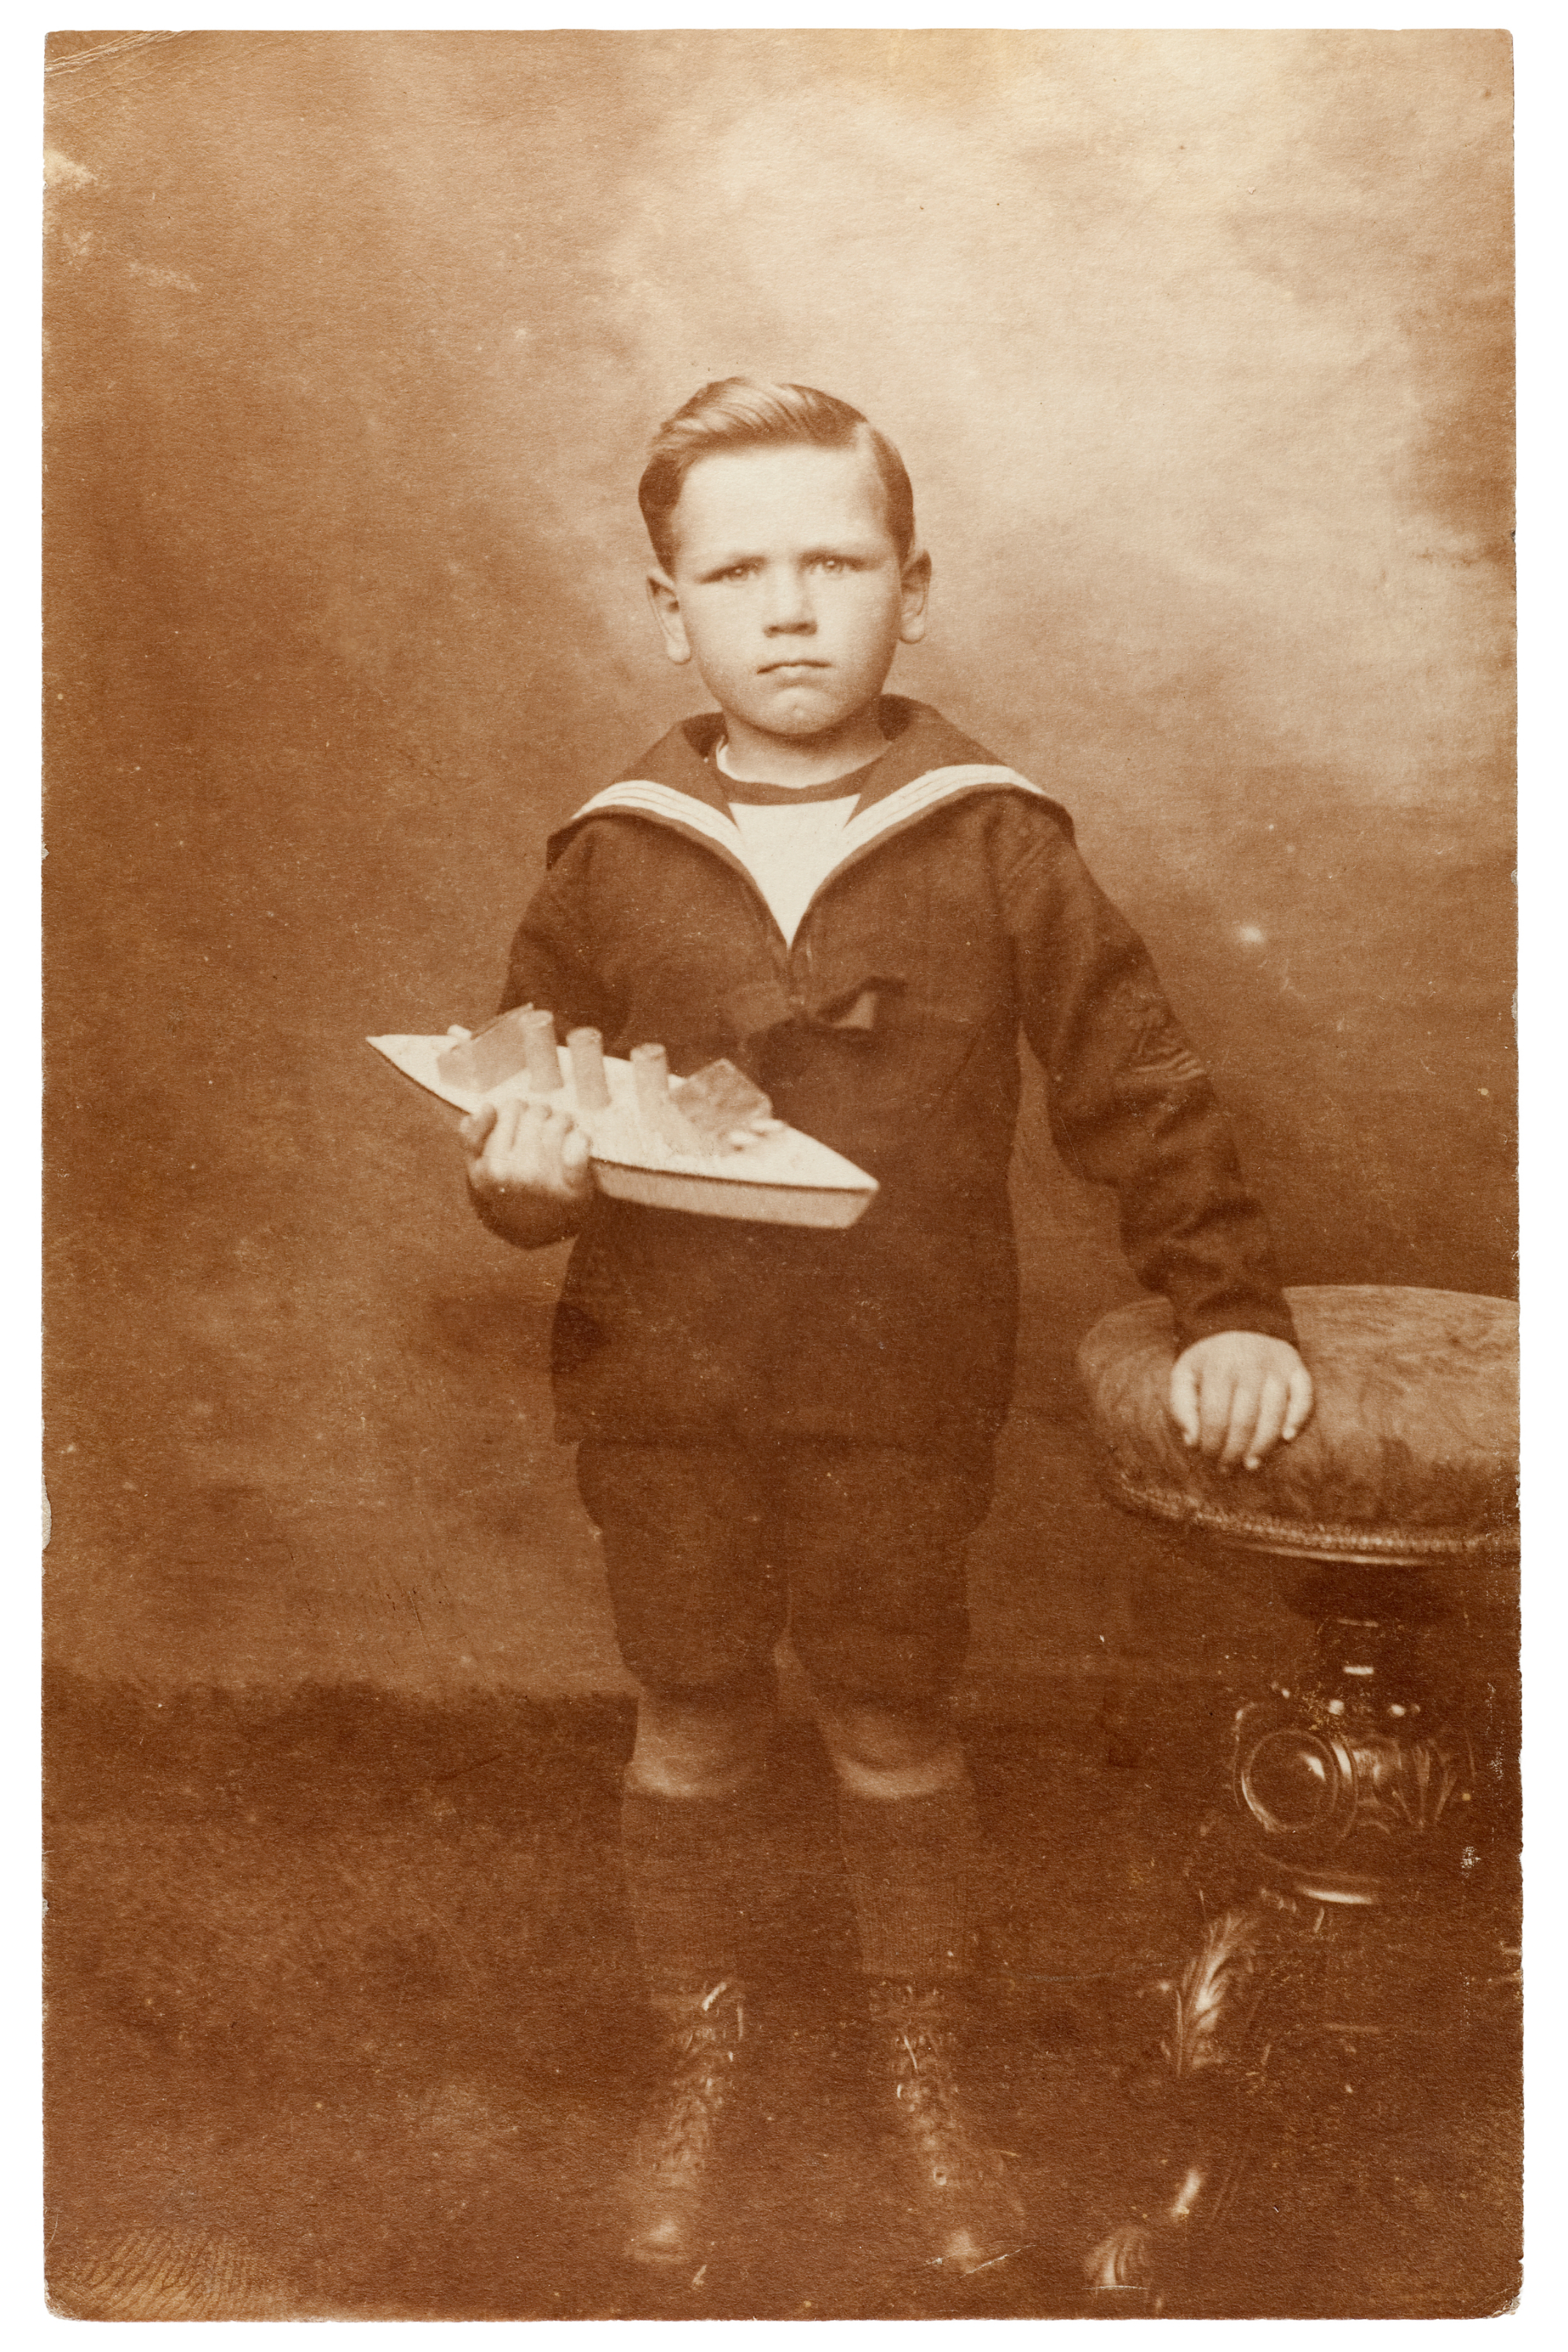 photo of a young boy in a sailor&#x27;s outfit holding a toy boat, circa 1910